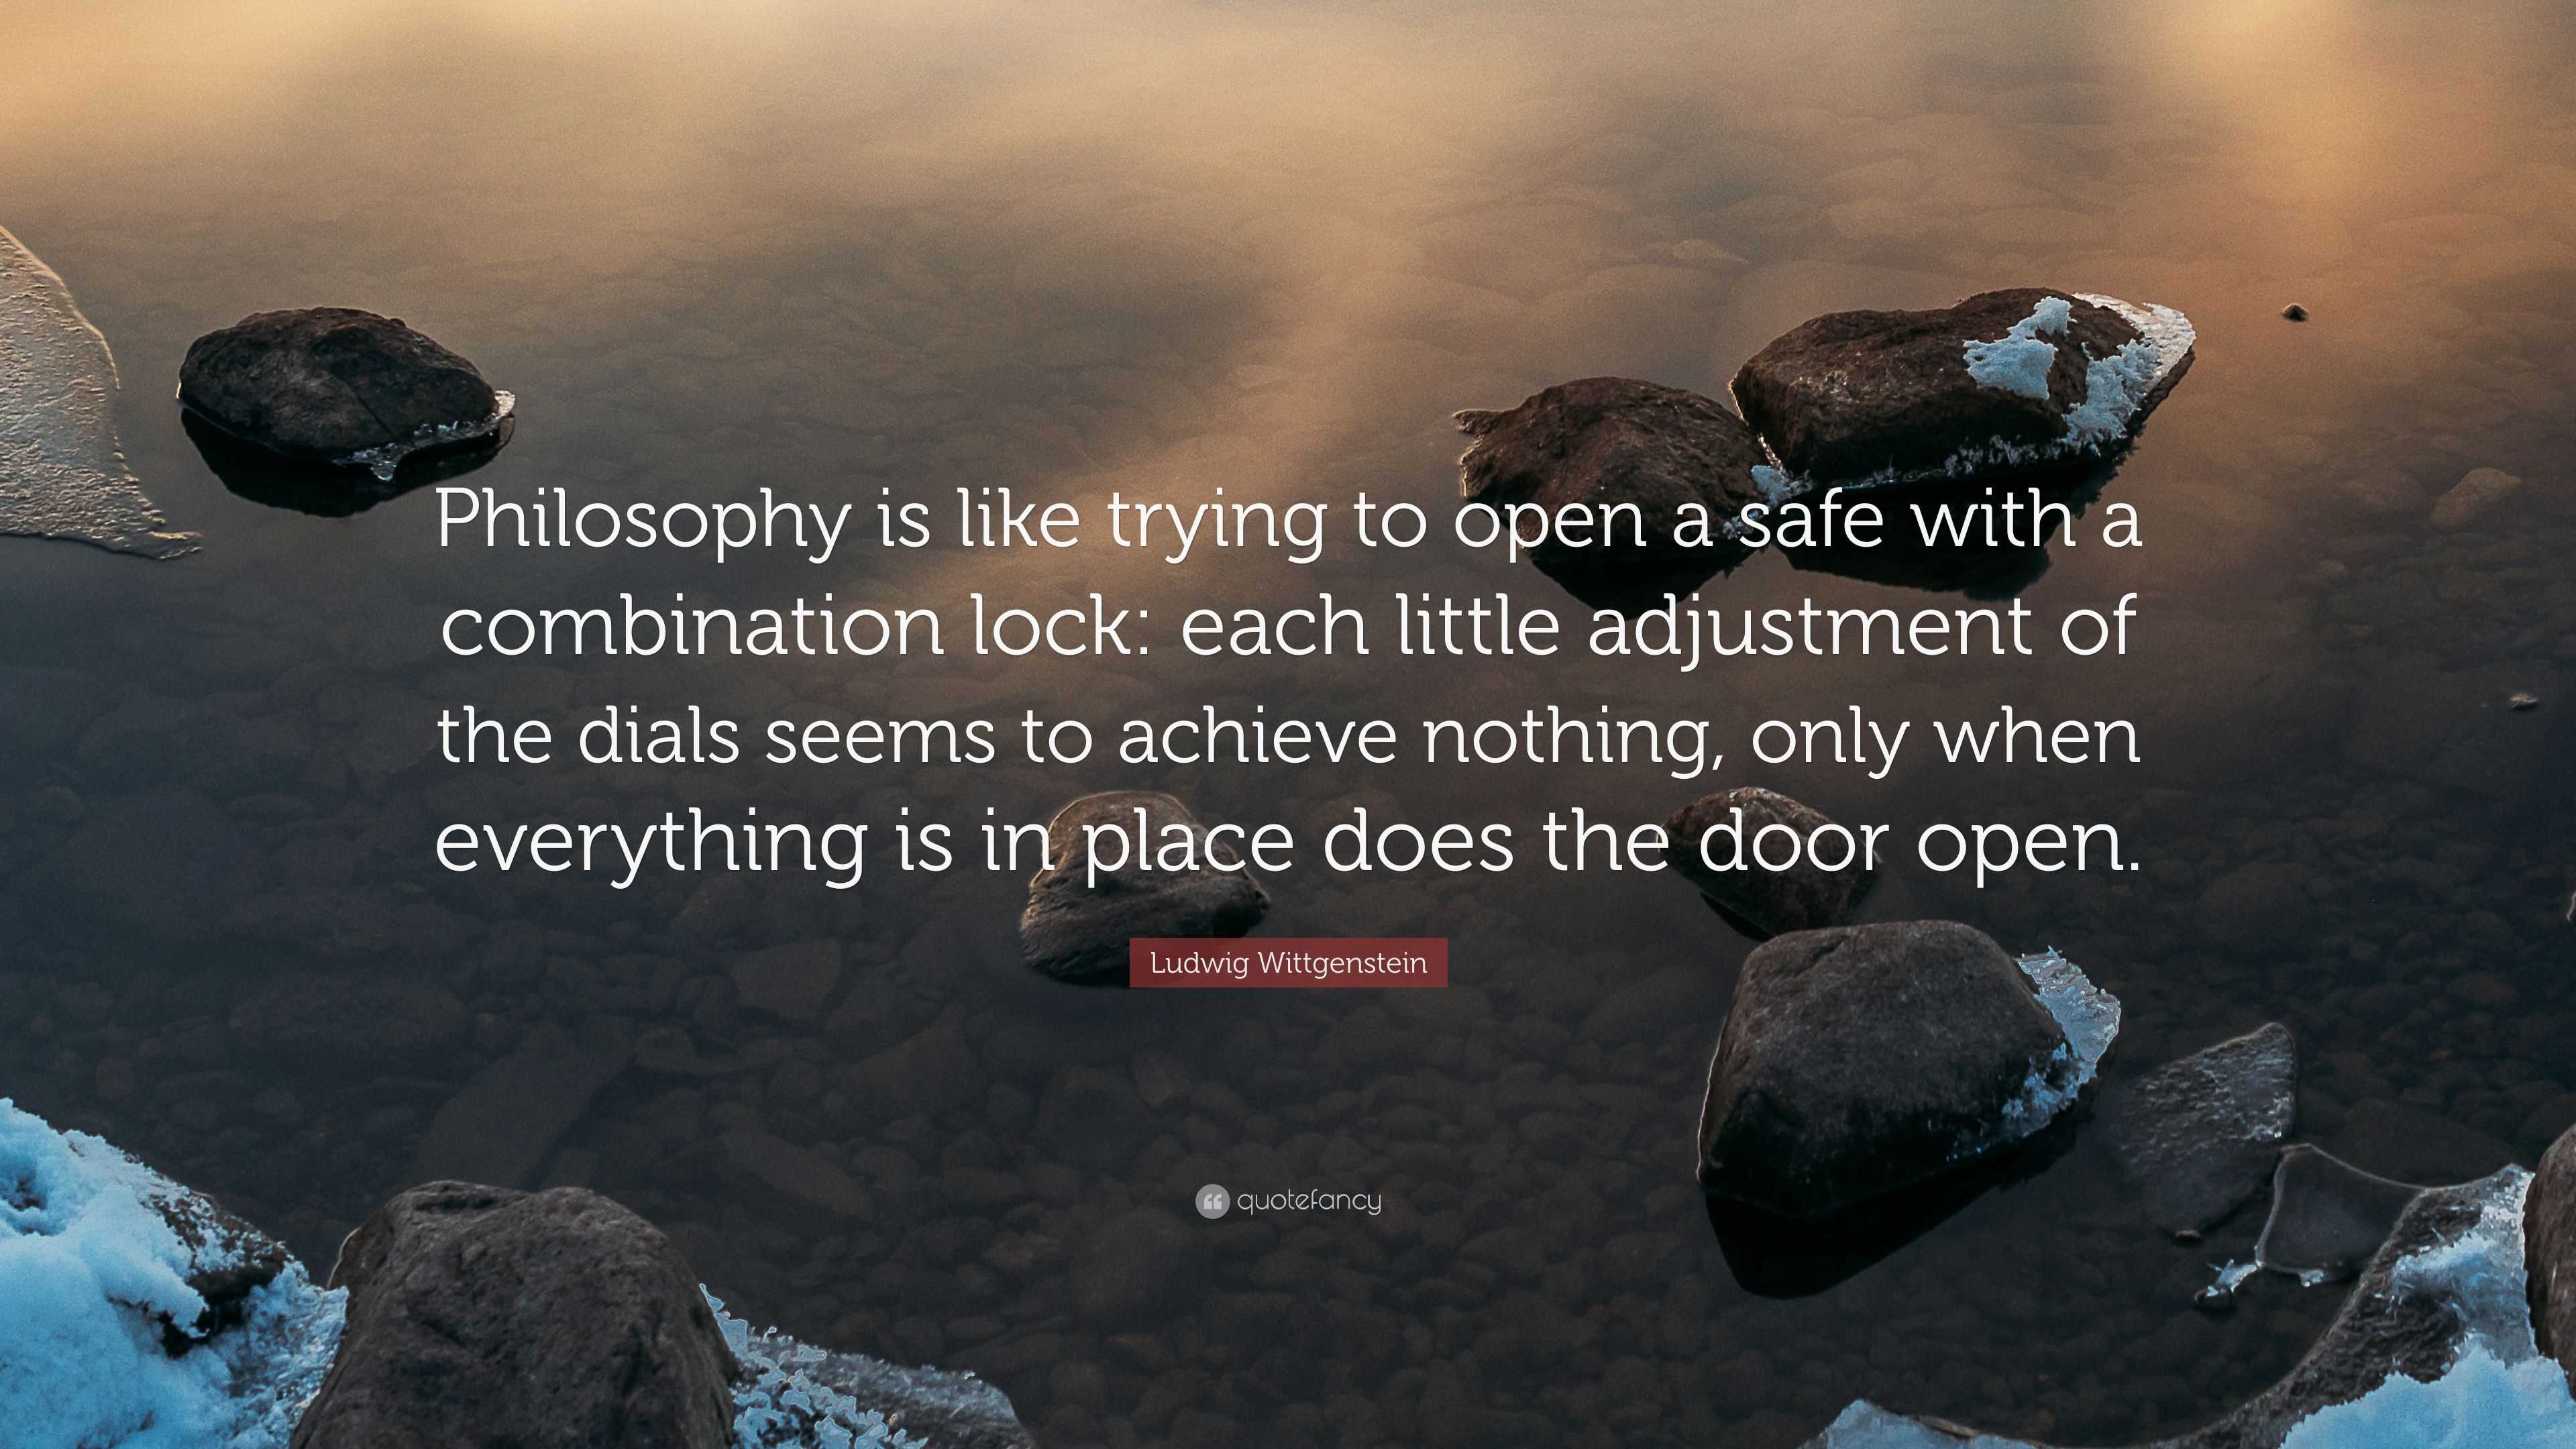 https://quotefancy.com/media/wallpaper/3840x2160/3675276-Ludwig-Wittgenstein-Quote-Philosophy-is-like-trying-to-open-a-safe.jpg